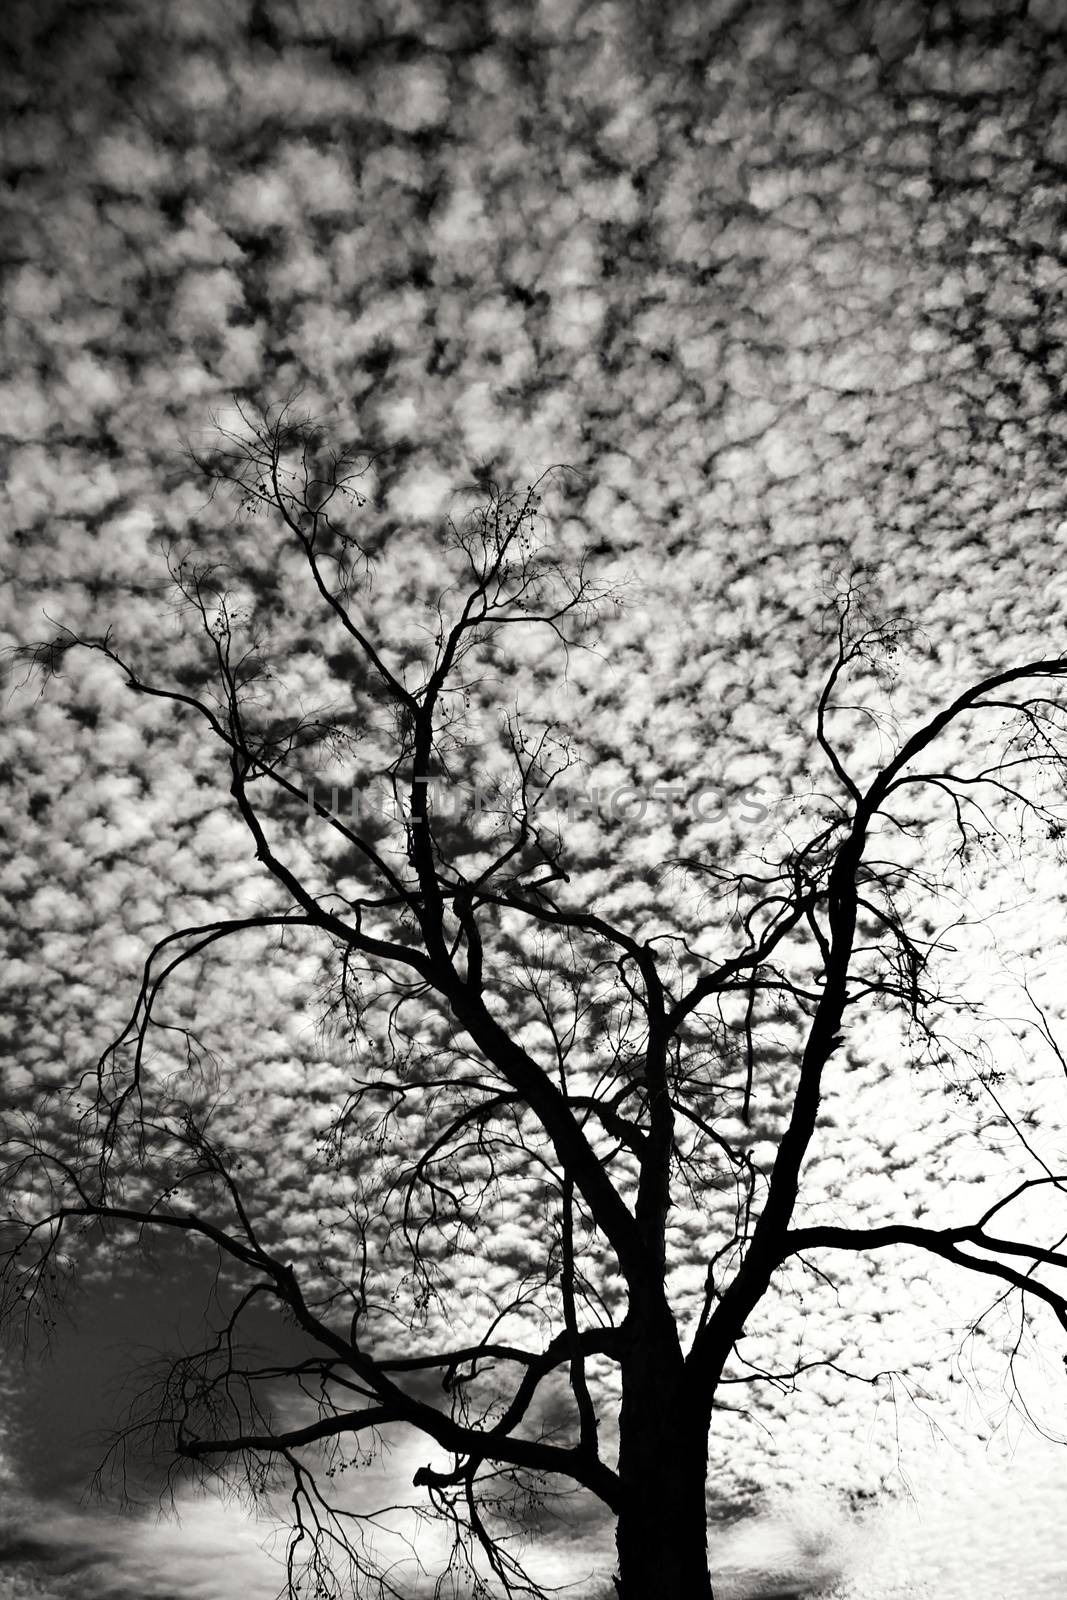 Sky with Altocumulus clouds and tree silhouette by soniabonet